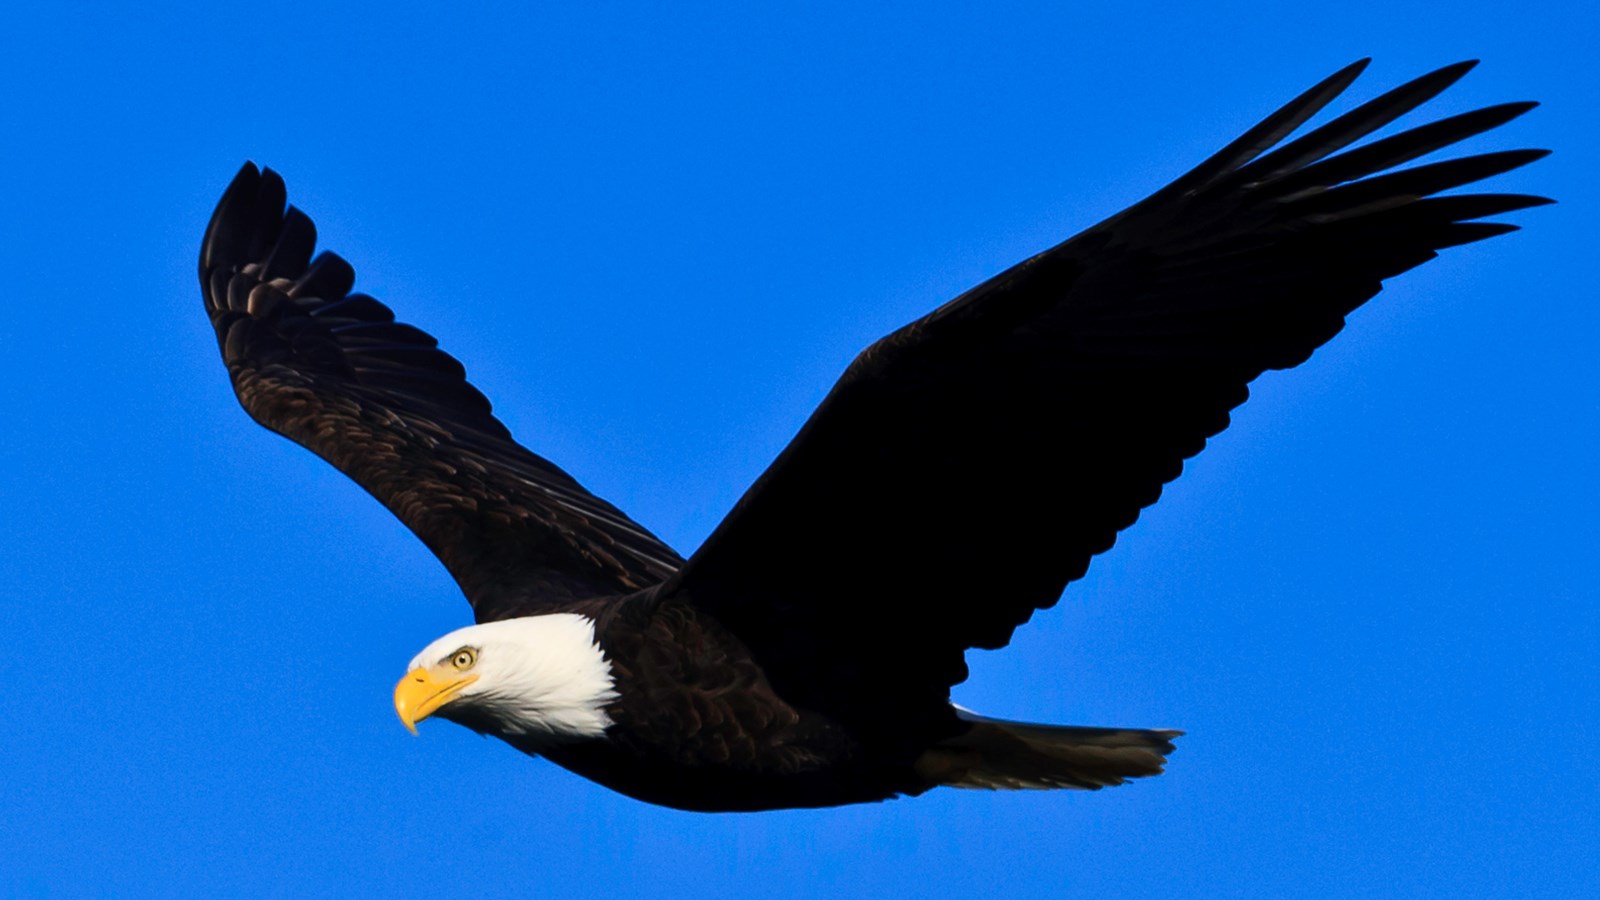 large bird with white head soaring against blue sky